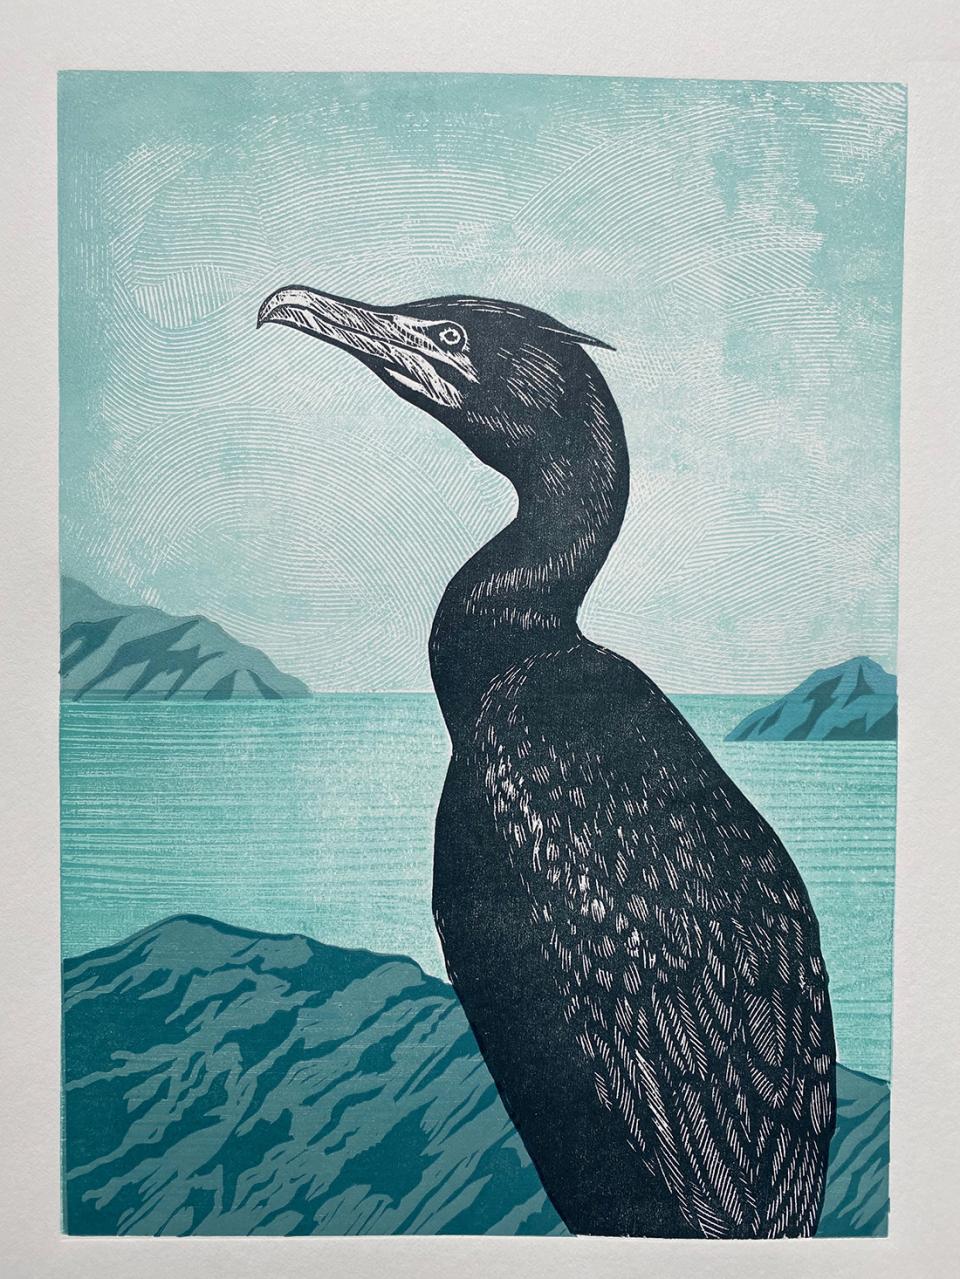 Jo Lysaght, Shag 2, Woodcut and relief print